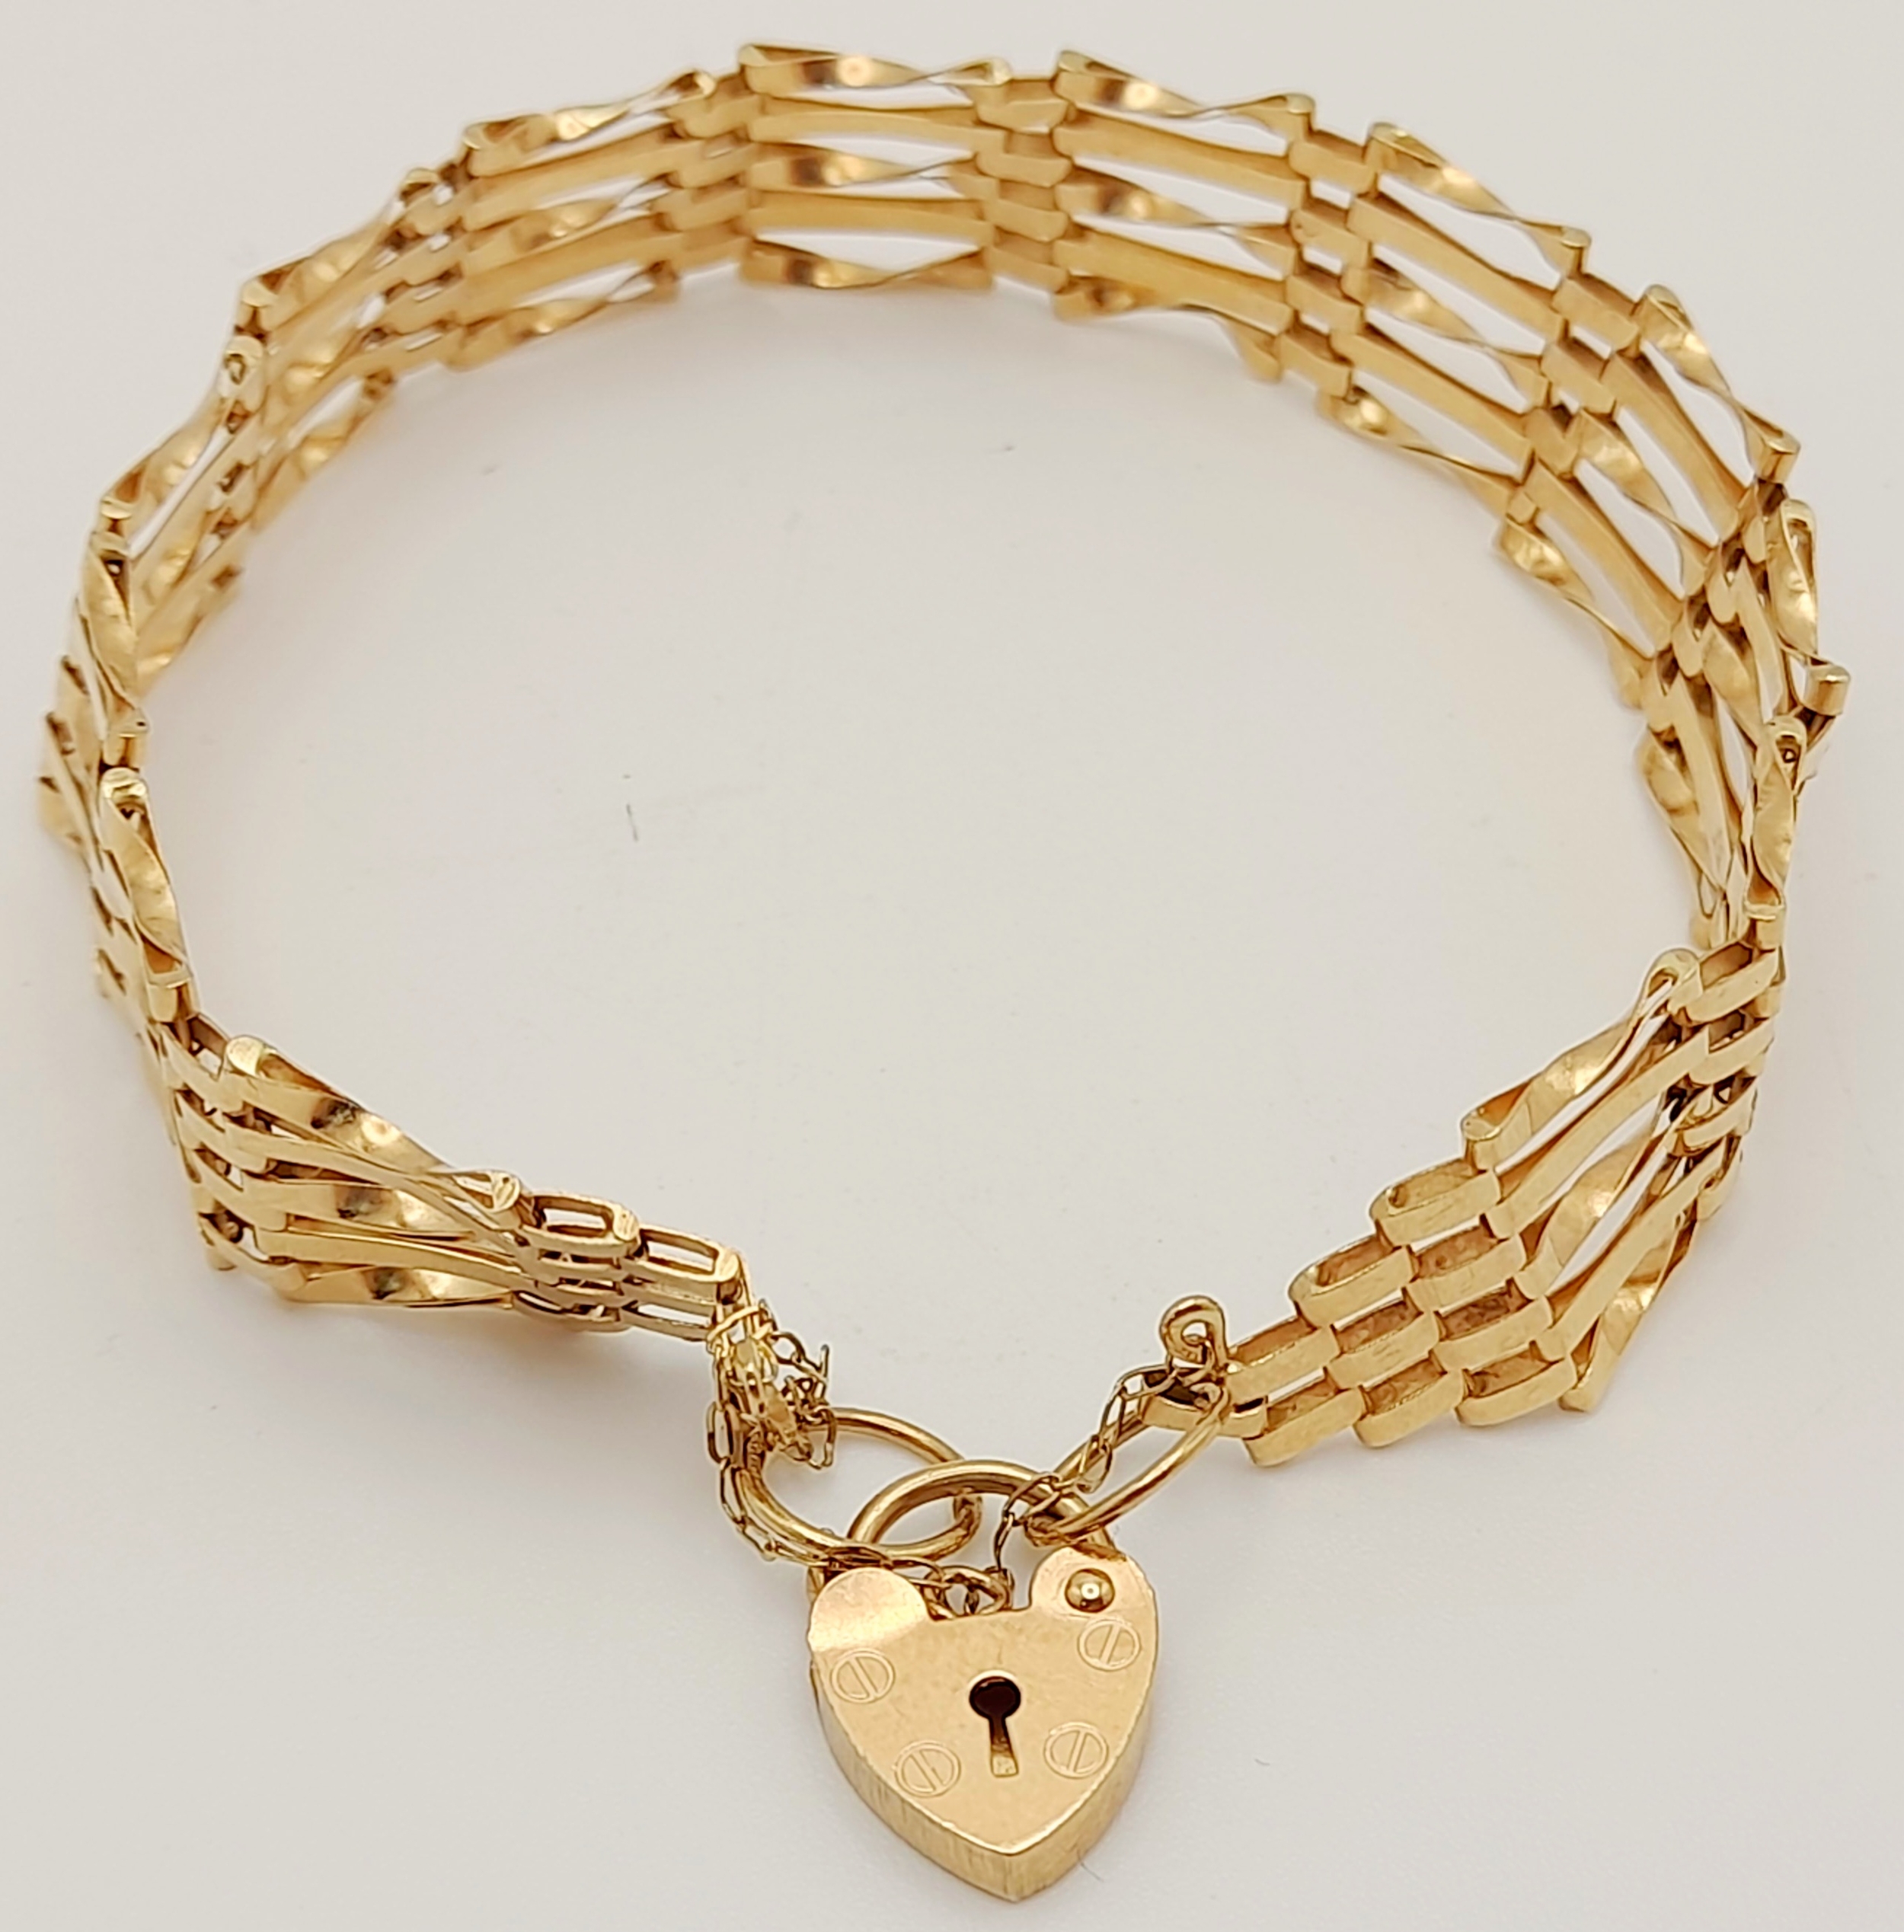 A 9 K yellow gold bracelet with a padlock clasp and safety chain, length: 18 cm, weight: 5.9 g.